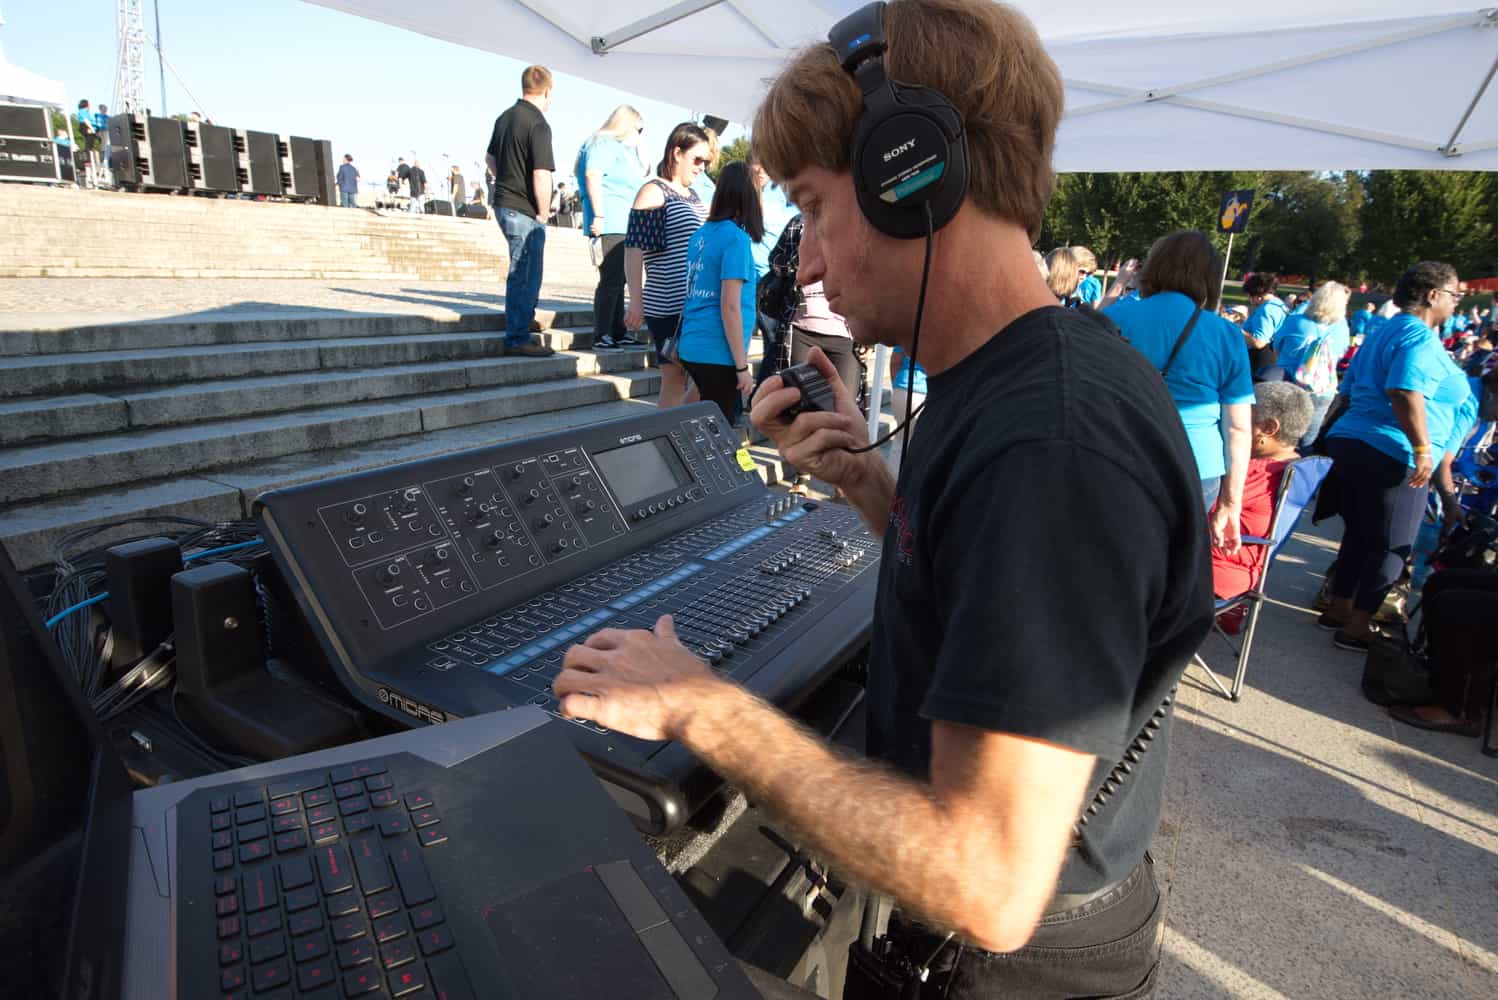 an A1 audio technician checking EQ levels on a digital mixing console during a soundcheck at and event.